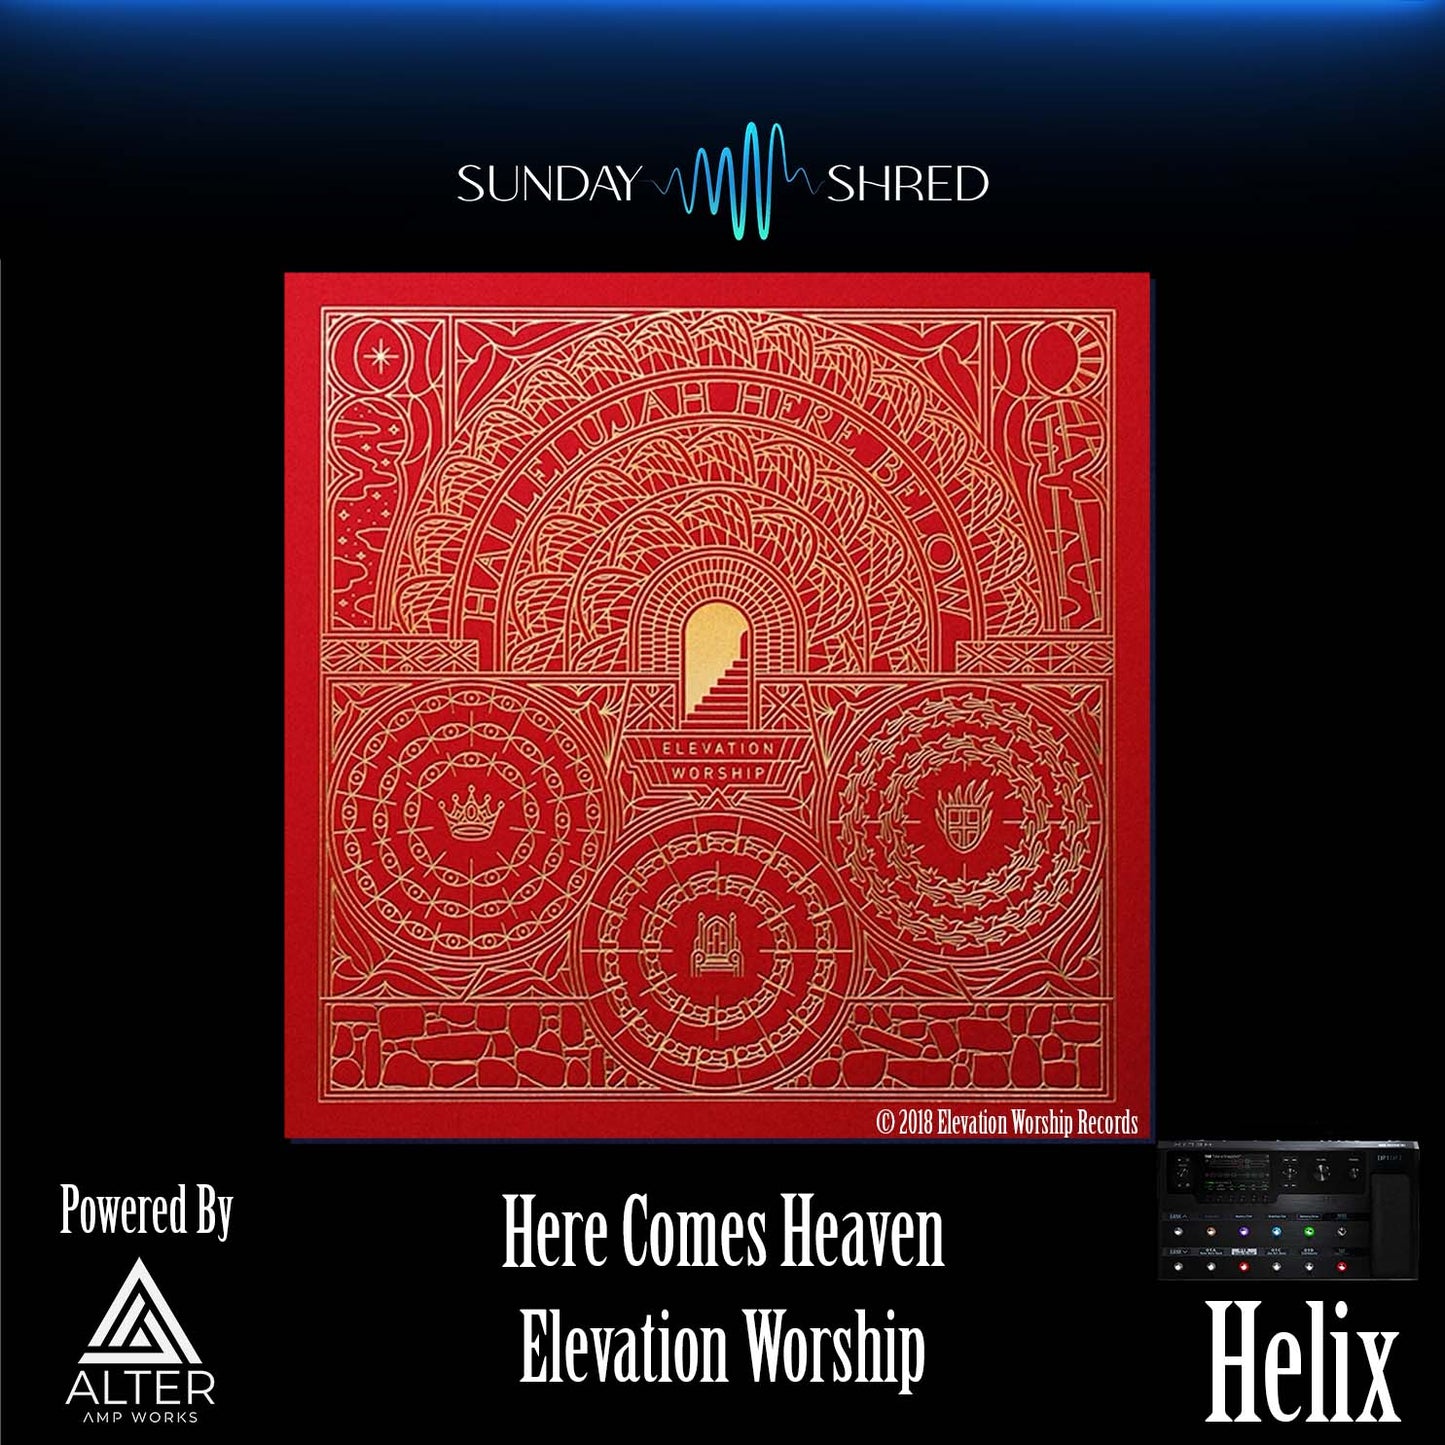 Here Comes Heaven - Elevation Worship - Helix Patch